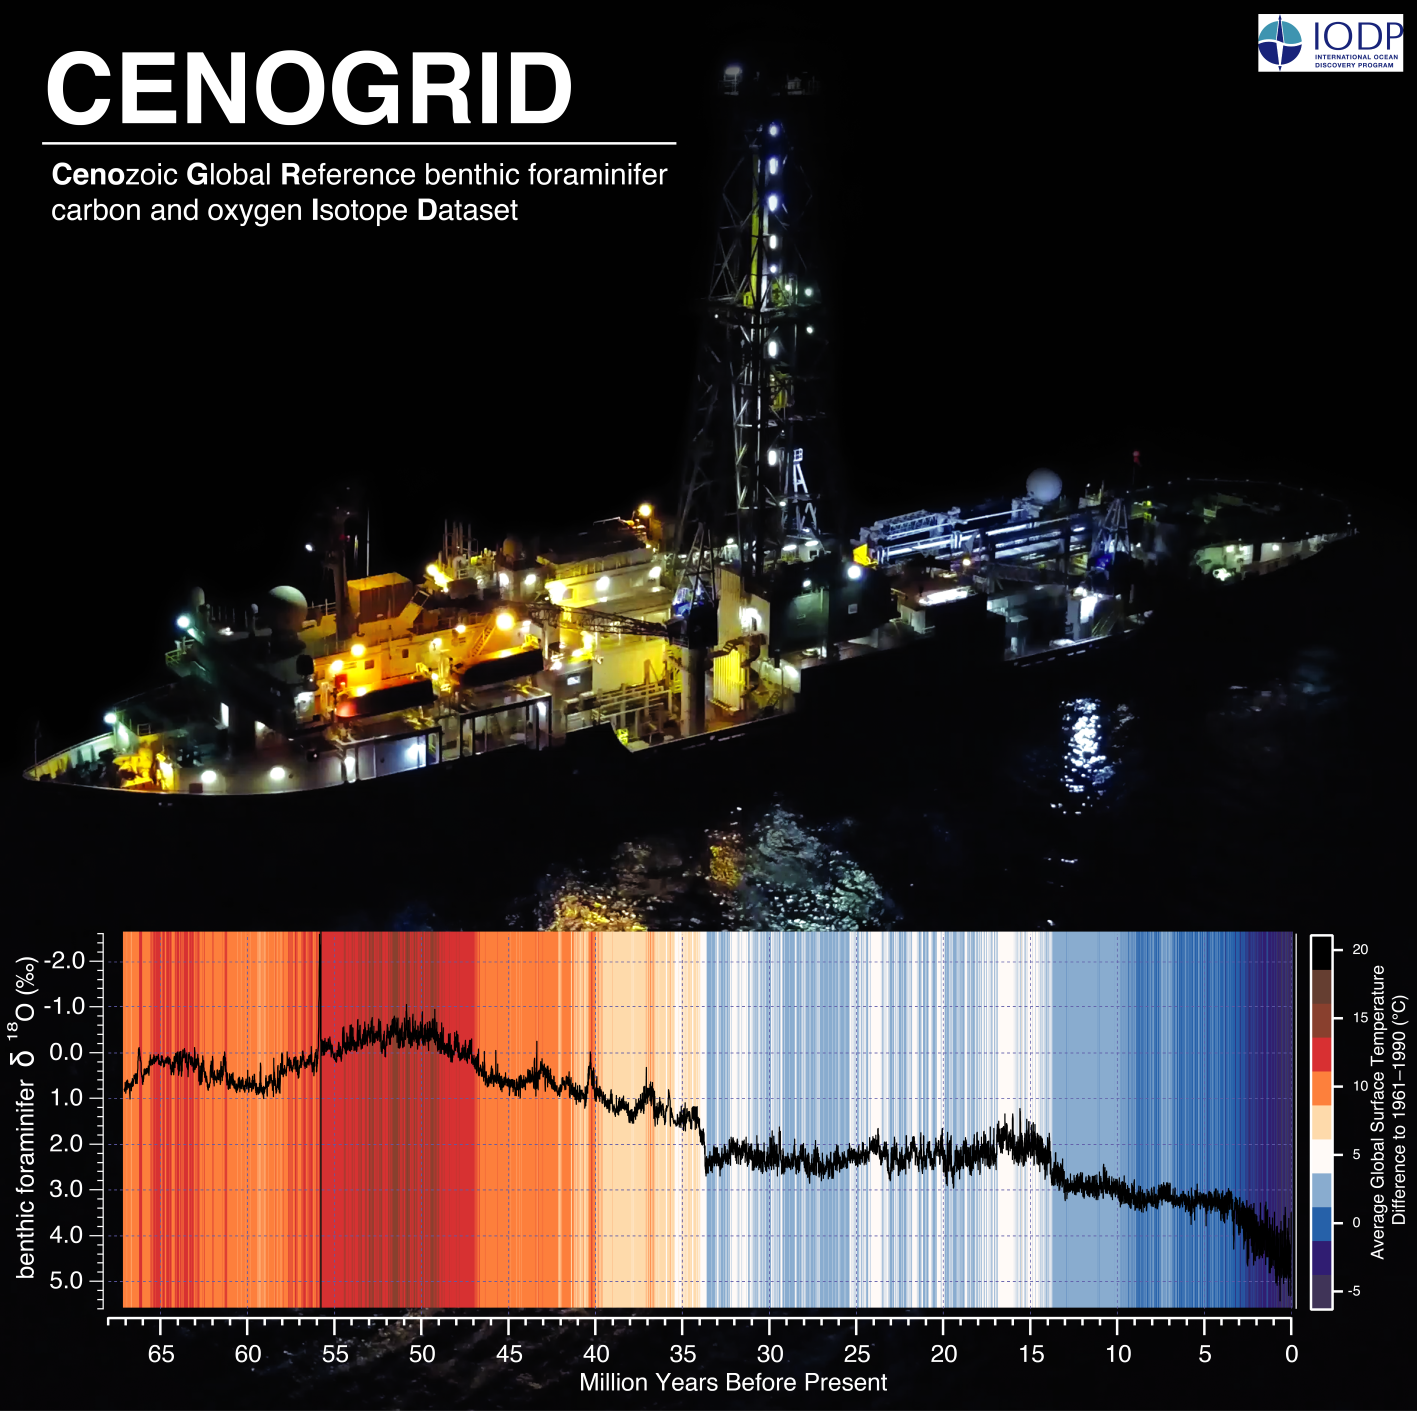 Image showing a marine coring vessel and the new CENOGRID climate curve, overlain on hot/cold colour bands to indicate the different climate states. Temperature is inferred from the concentration of the stable oxygen isotope δ18O of the marine sediments which is an indicator of global ice volume. Image credit Thomas Westerhold / Adam Kutz.